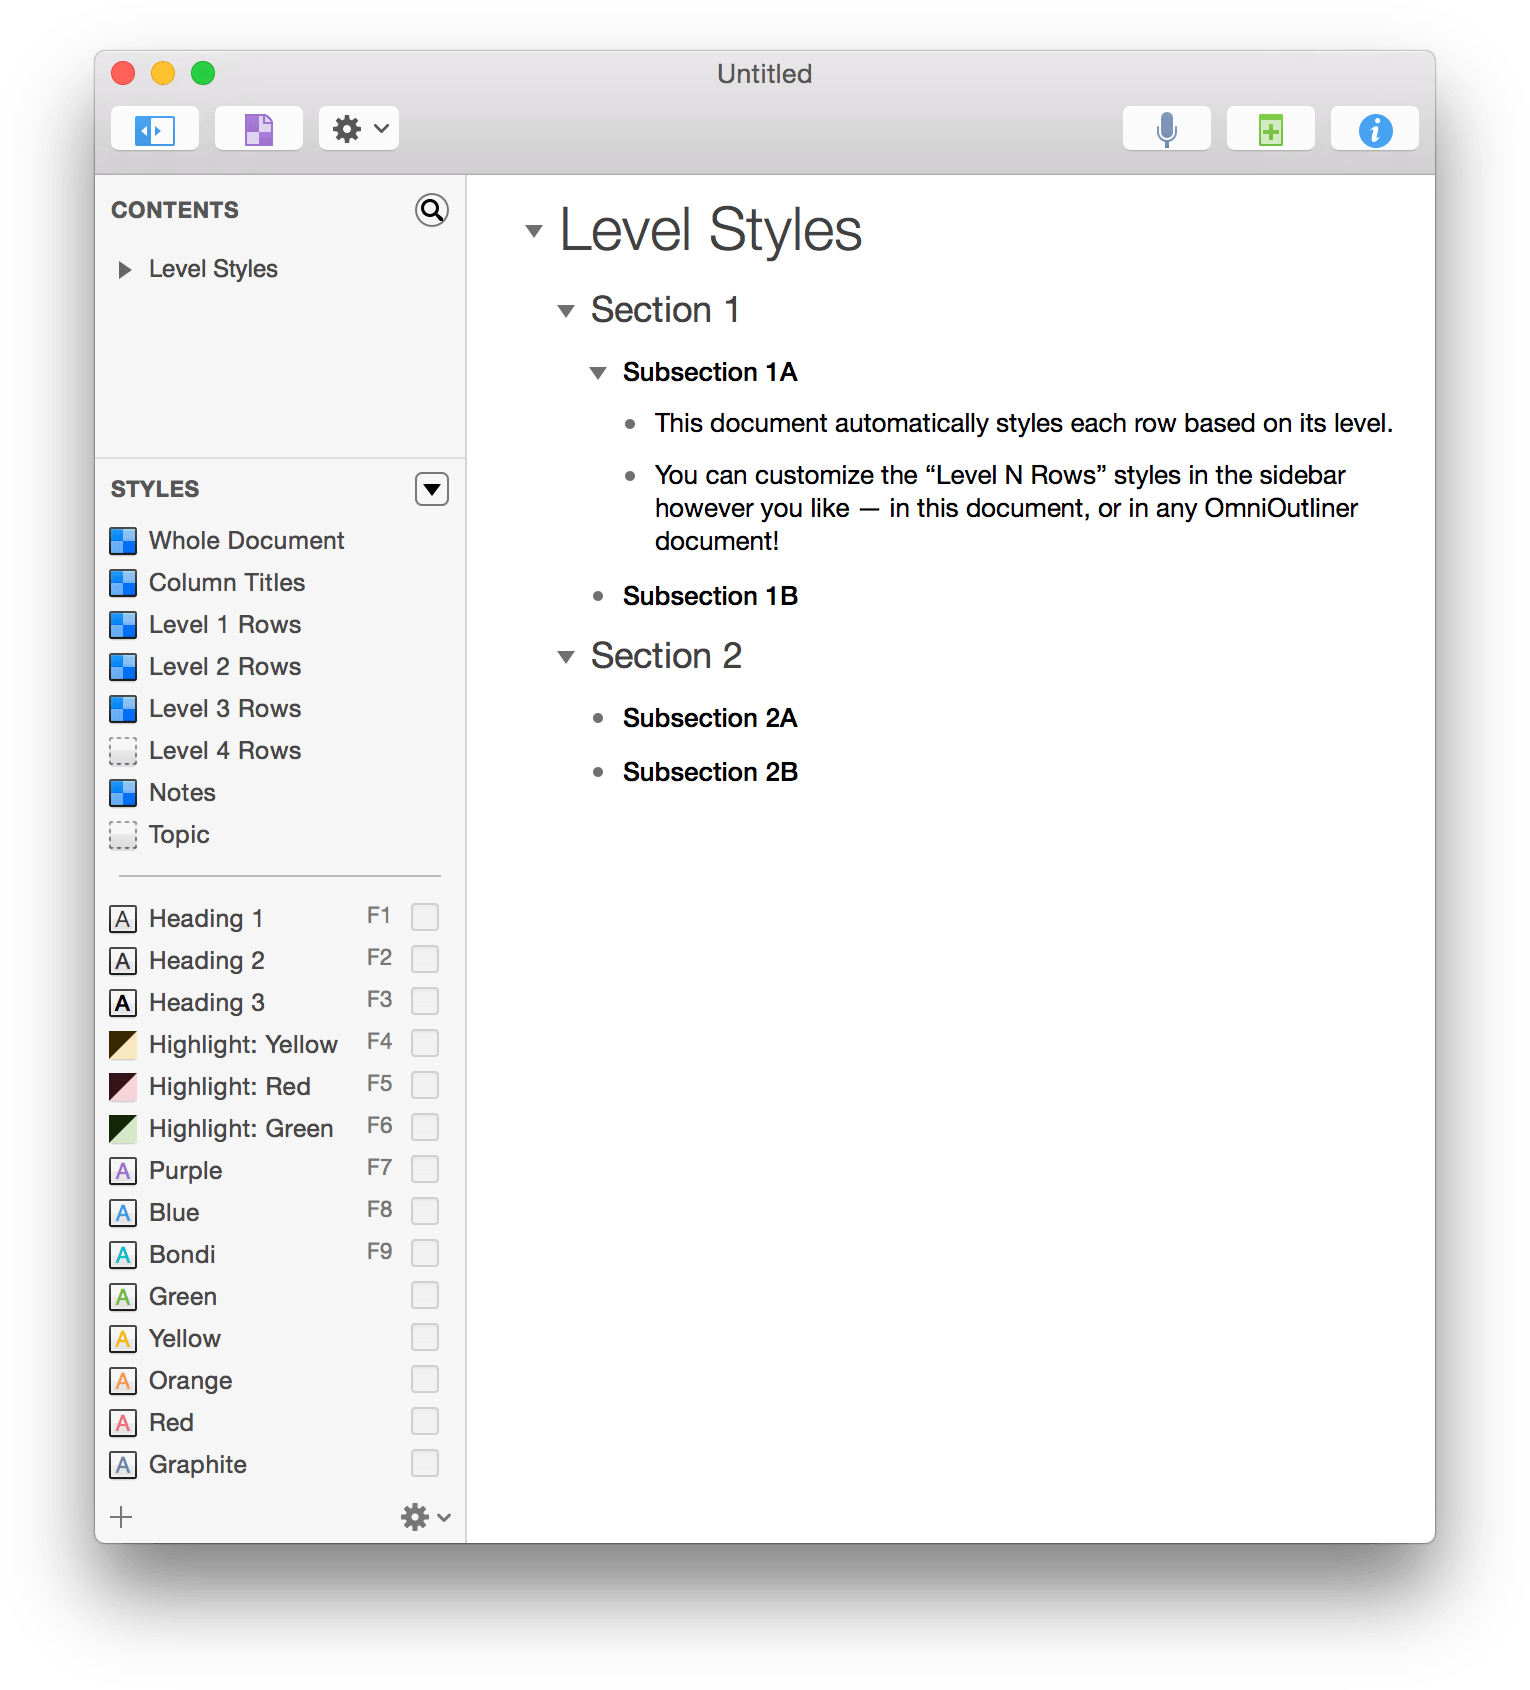 A new OmniOutliner document, based on the Modern with Level Styles-themed template